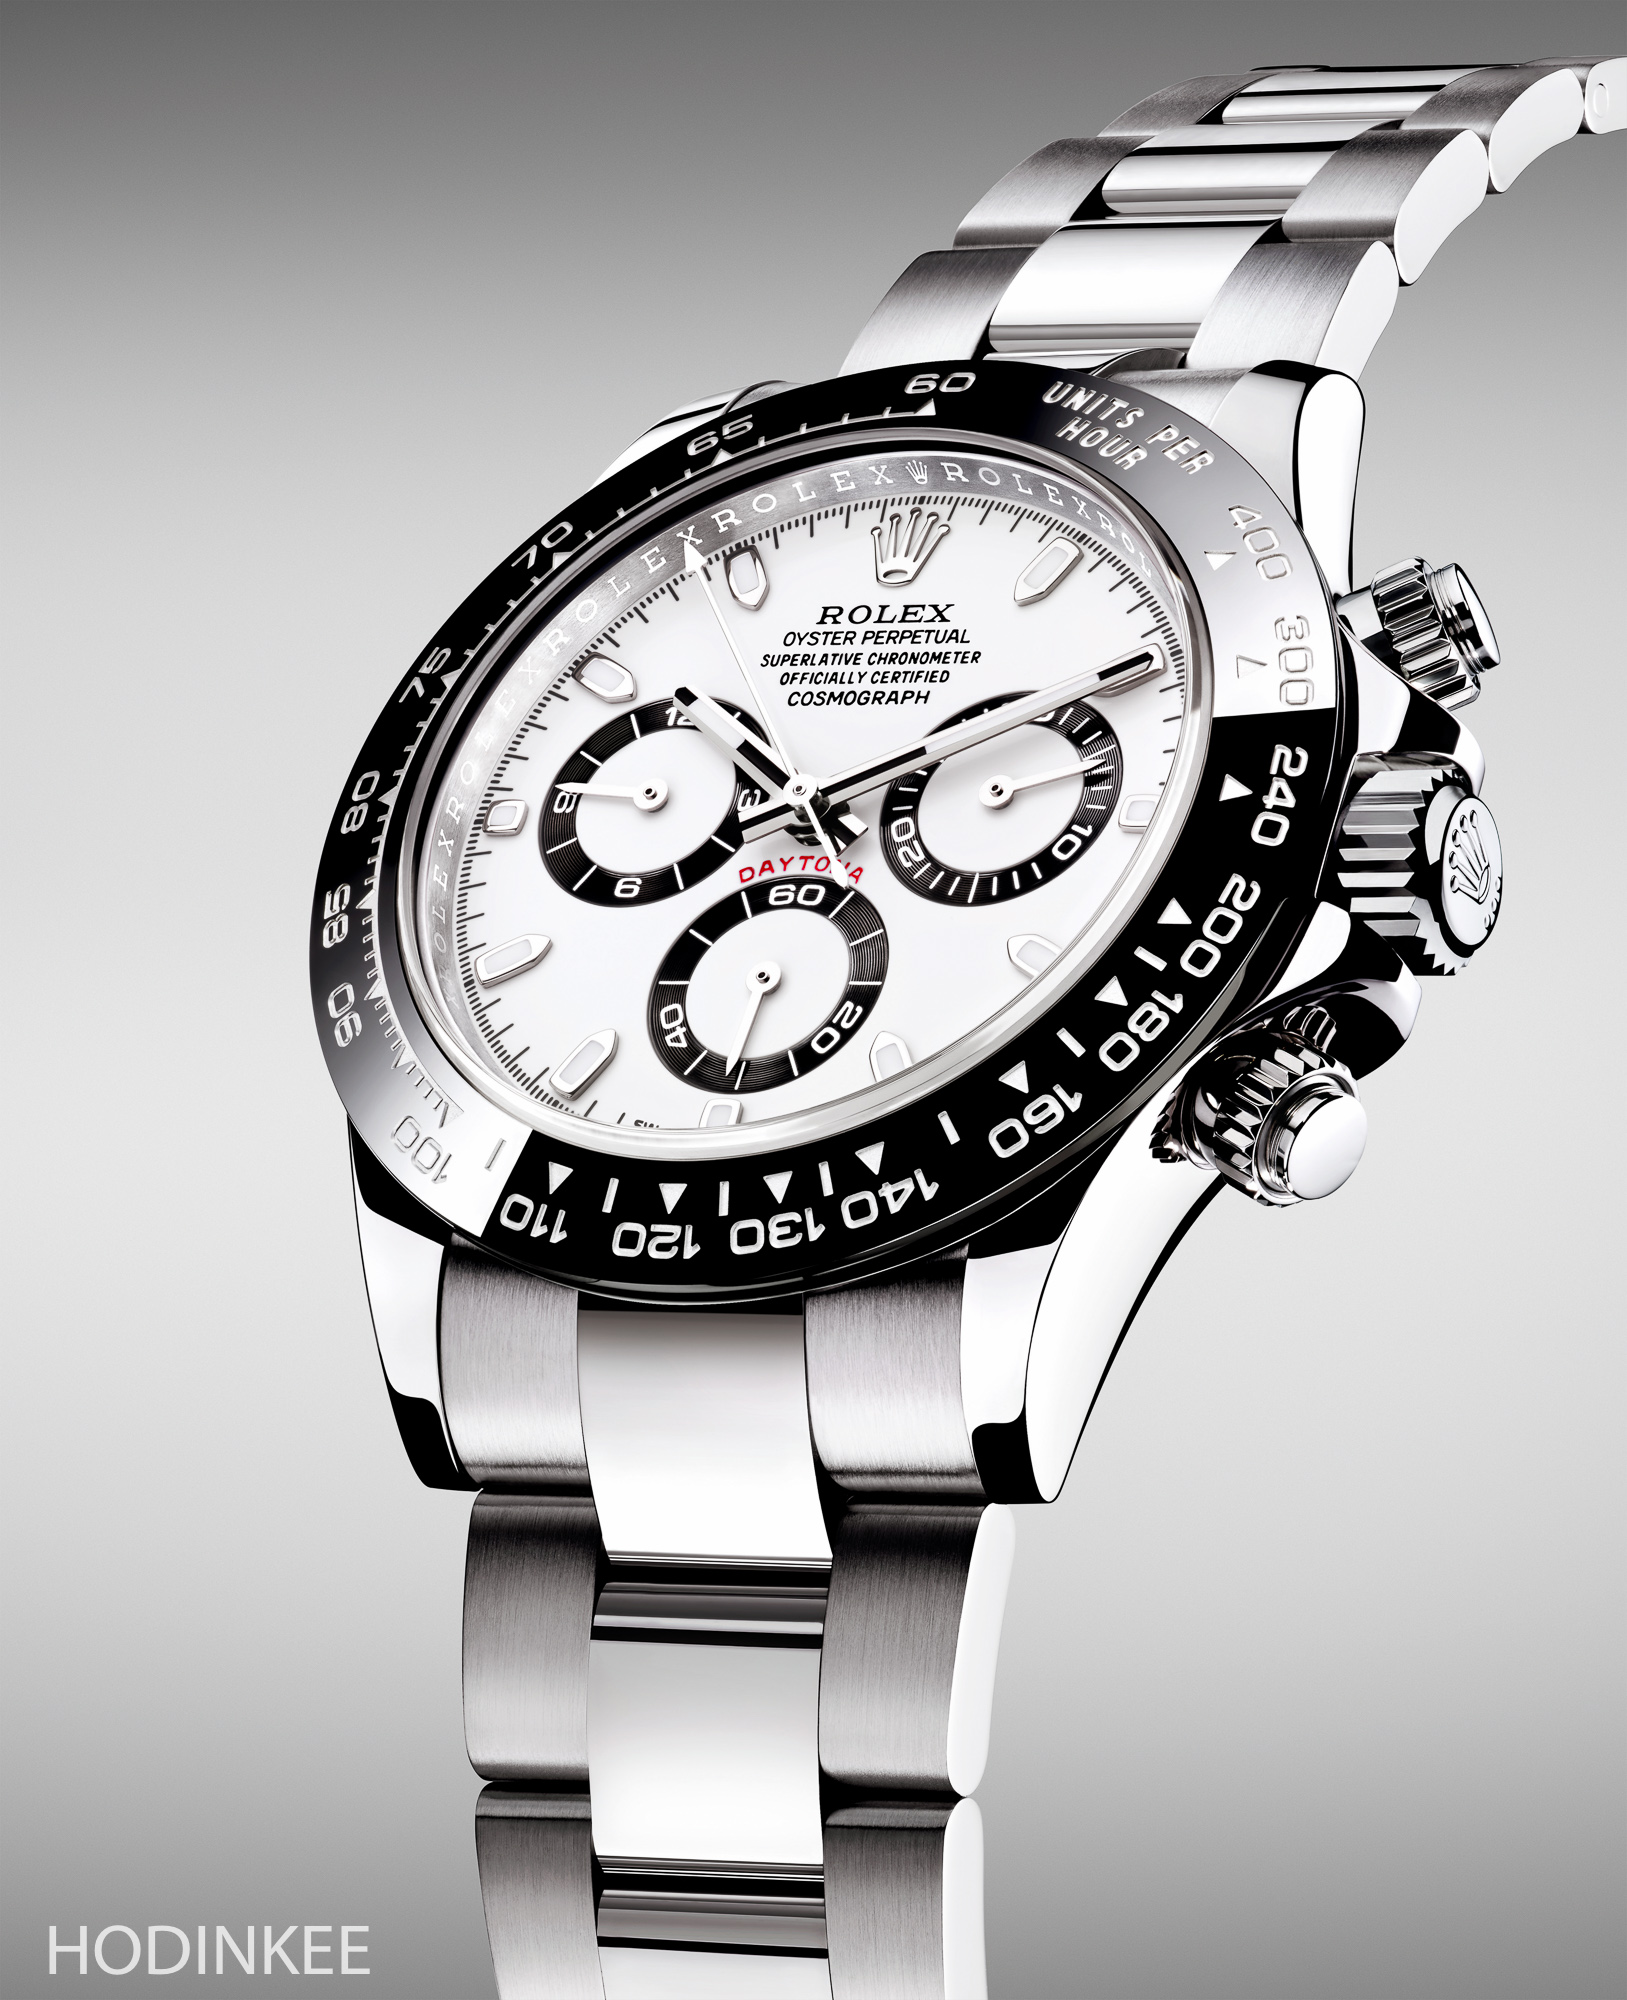 Introducing: The New Rolex Daytona, Now 